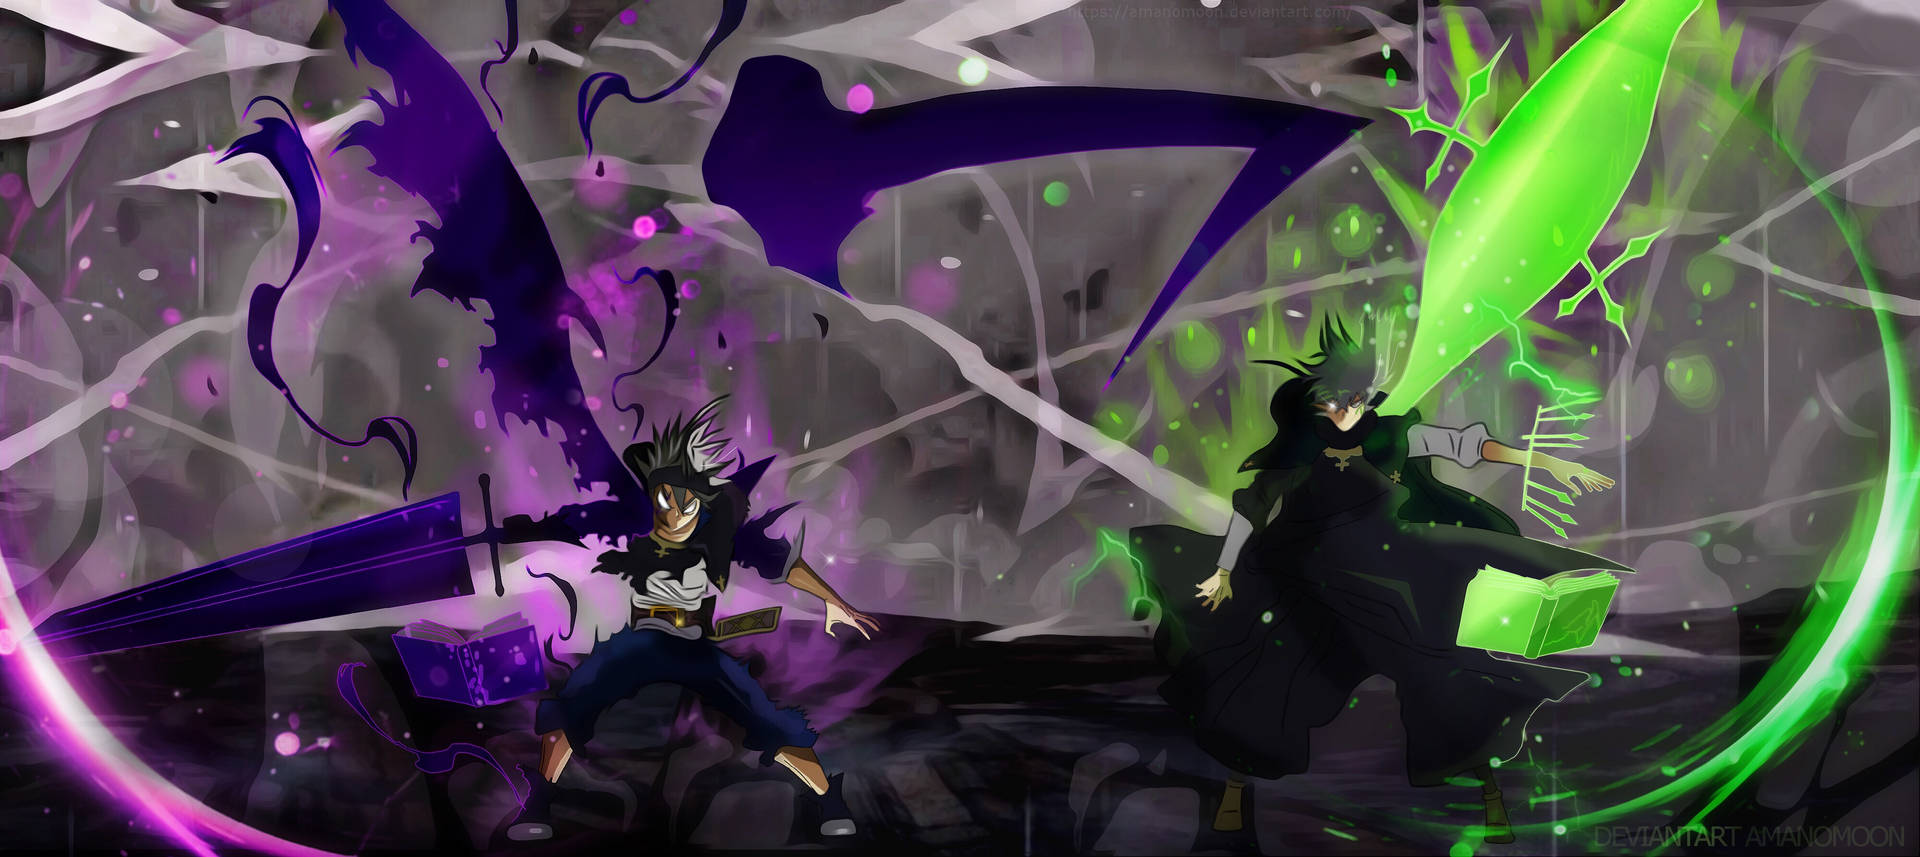 Find power and courage inside of yourself with Black Clover. Wallpaper